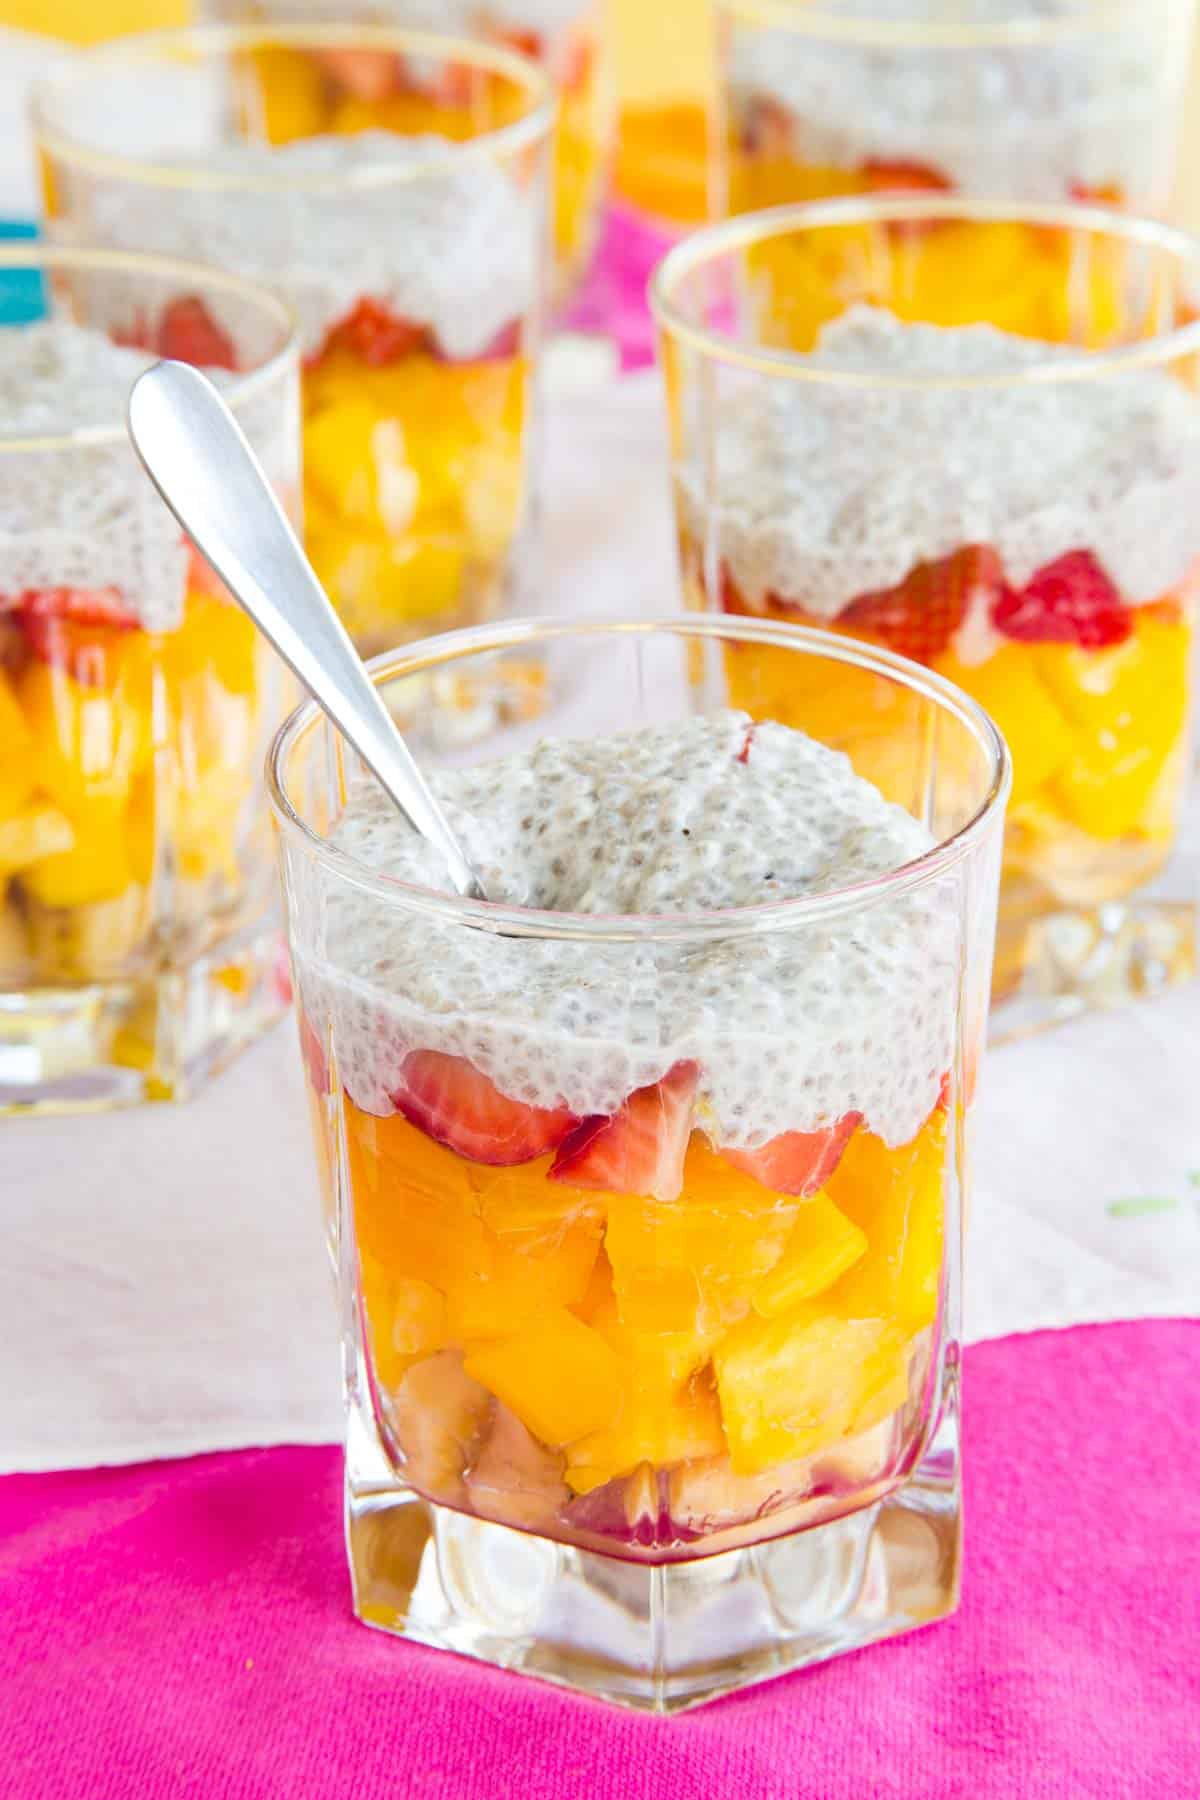 A spoon in a glass of tropical fruit salad with coconut cream on top.